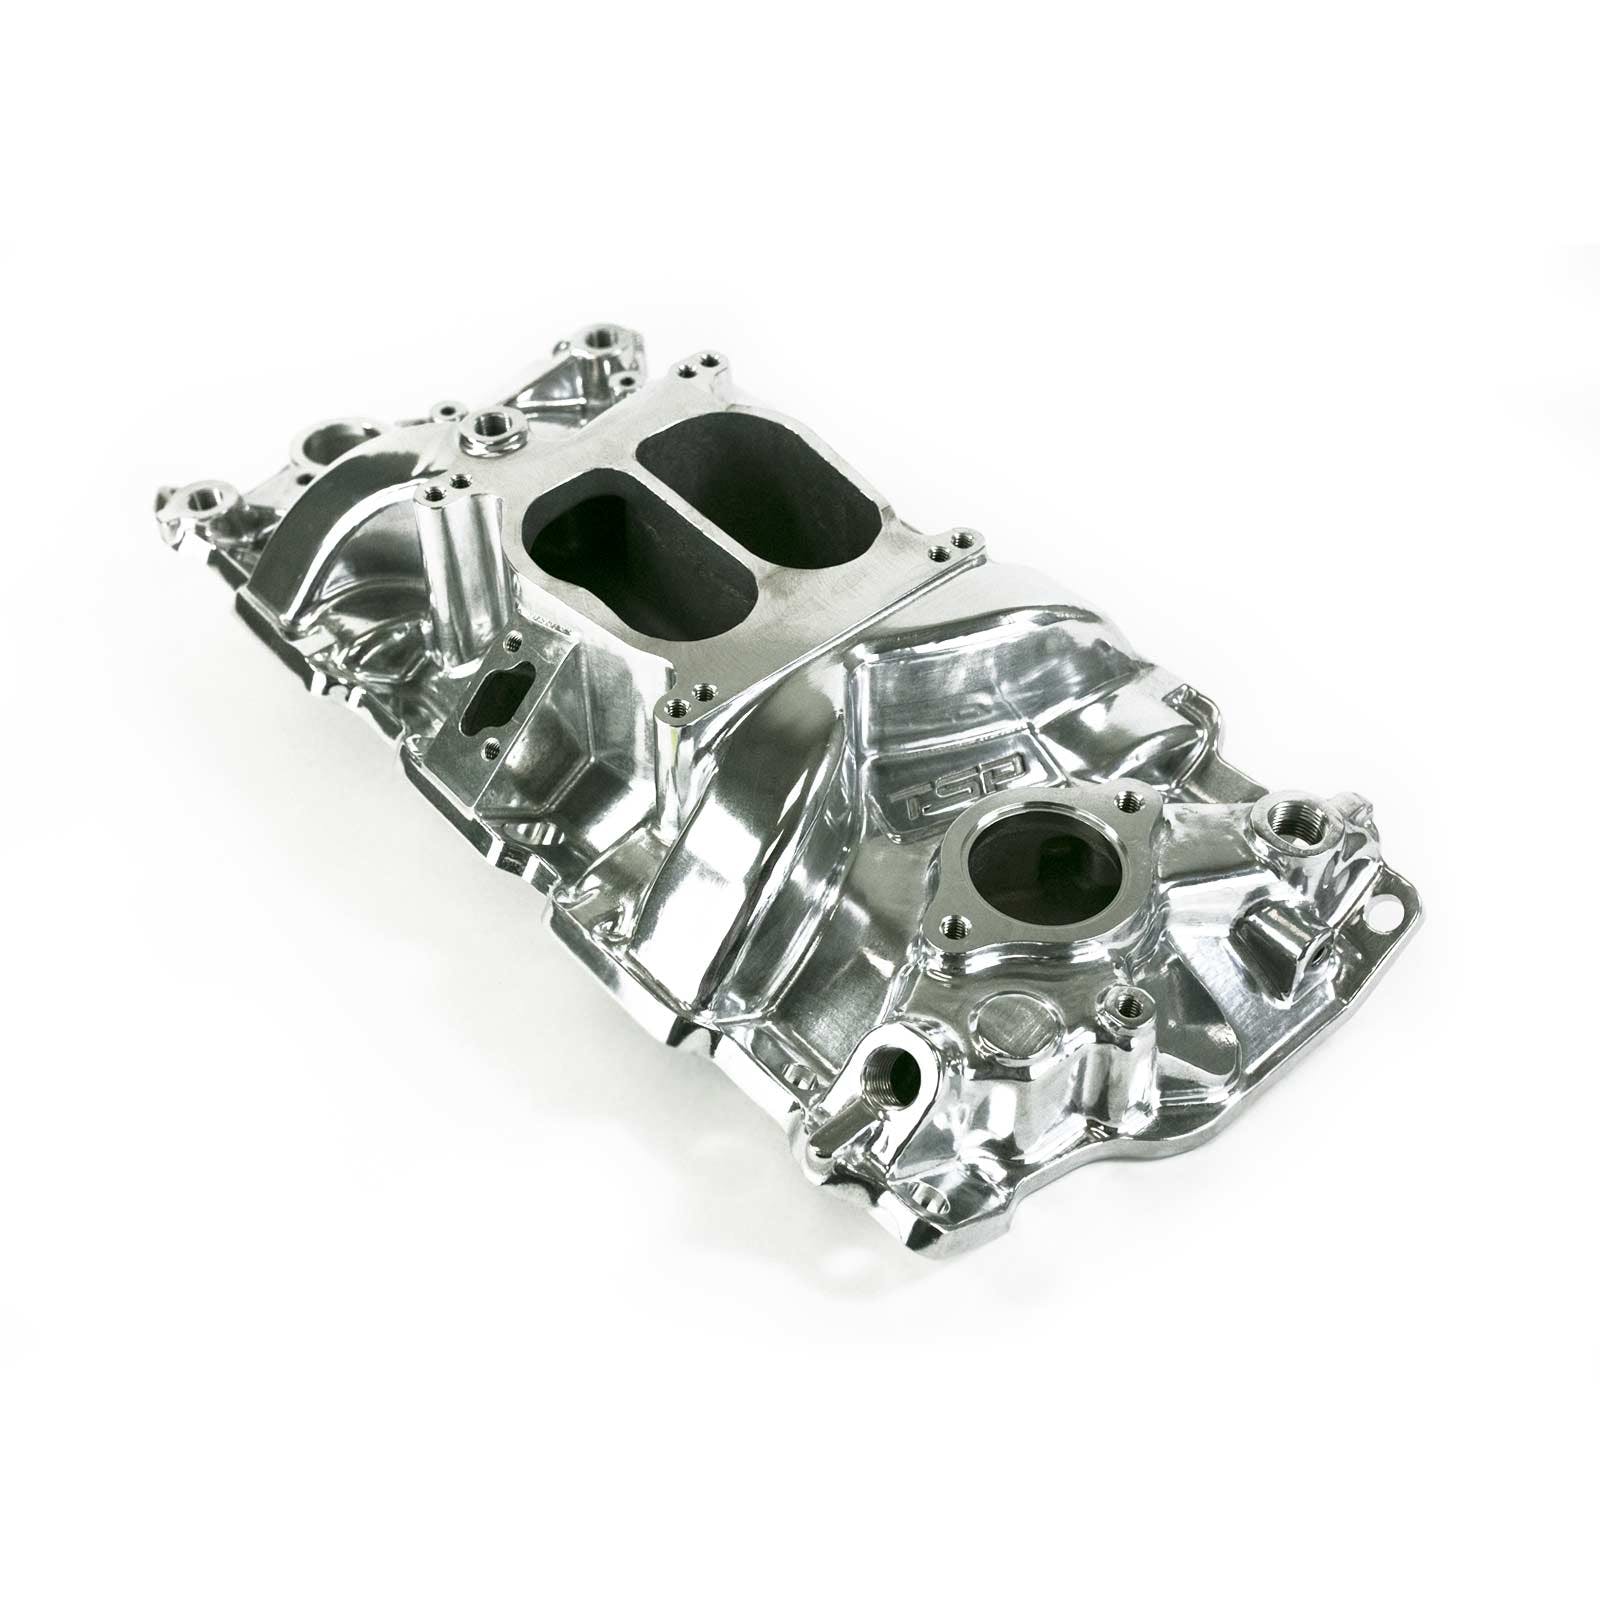 Top Street Performance 82000 Stock Dual Plane Intake Manifold, Polished (Non-Egr Engines)